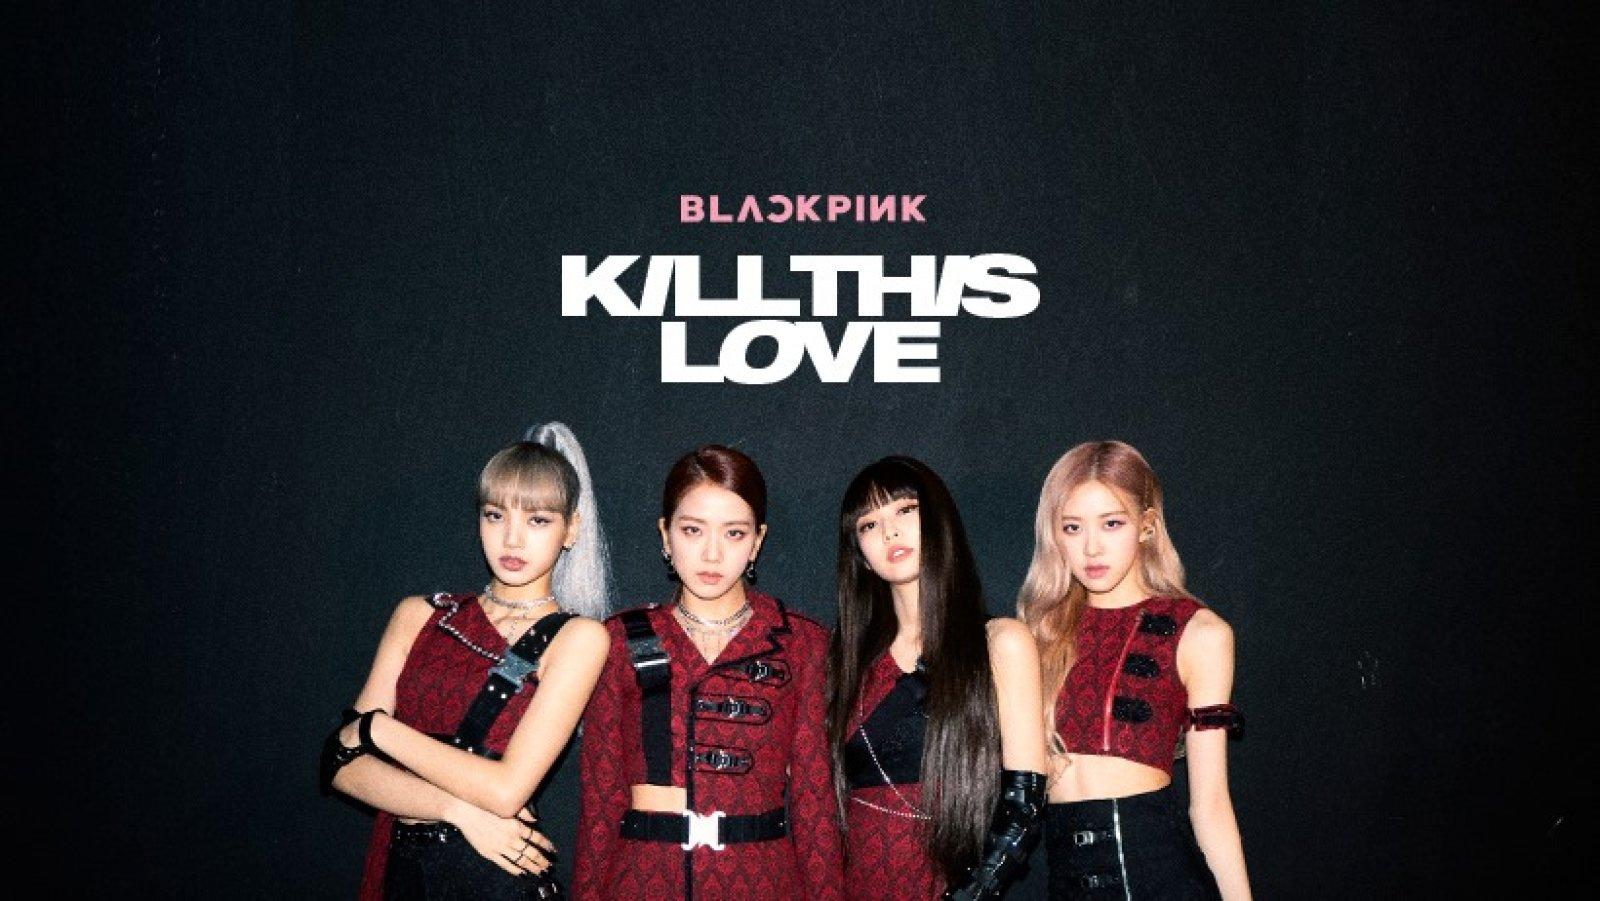 Blackpink's 'Kill This Love' is breaking YouTube records